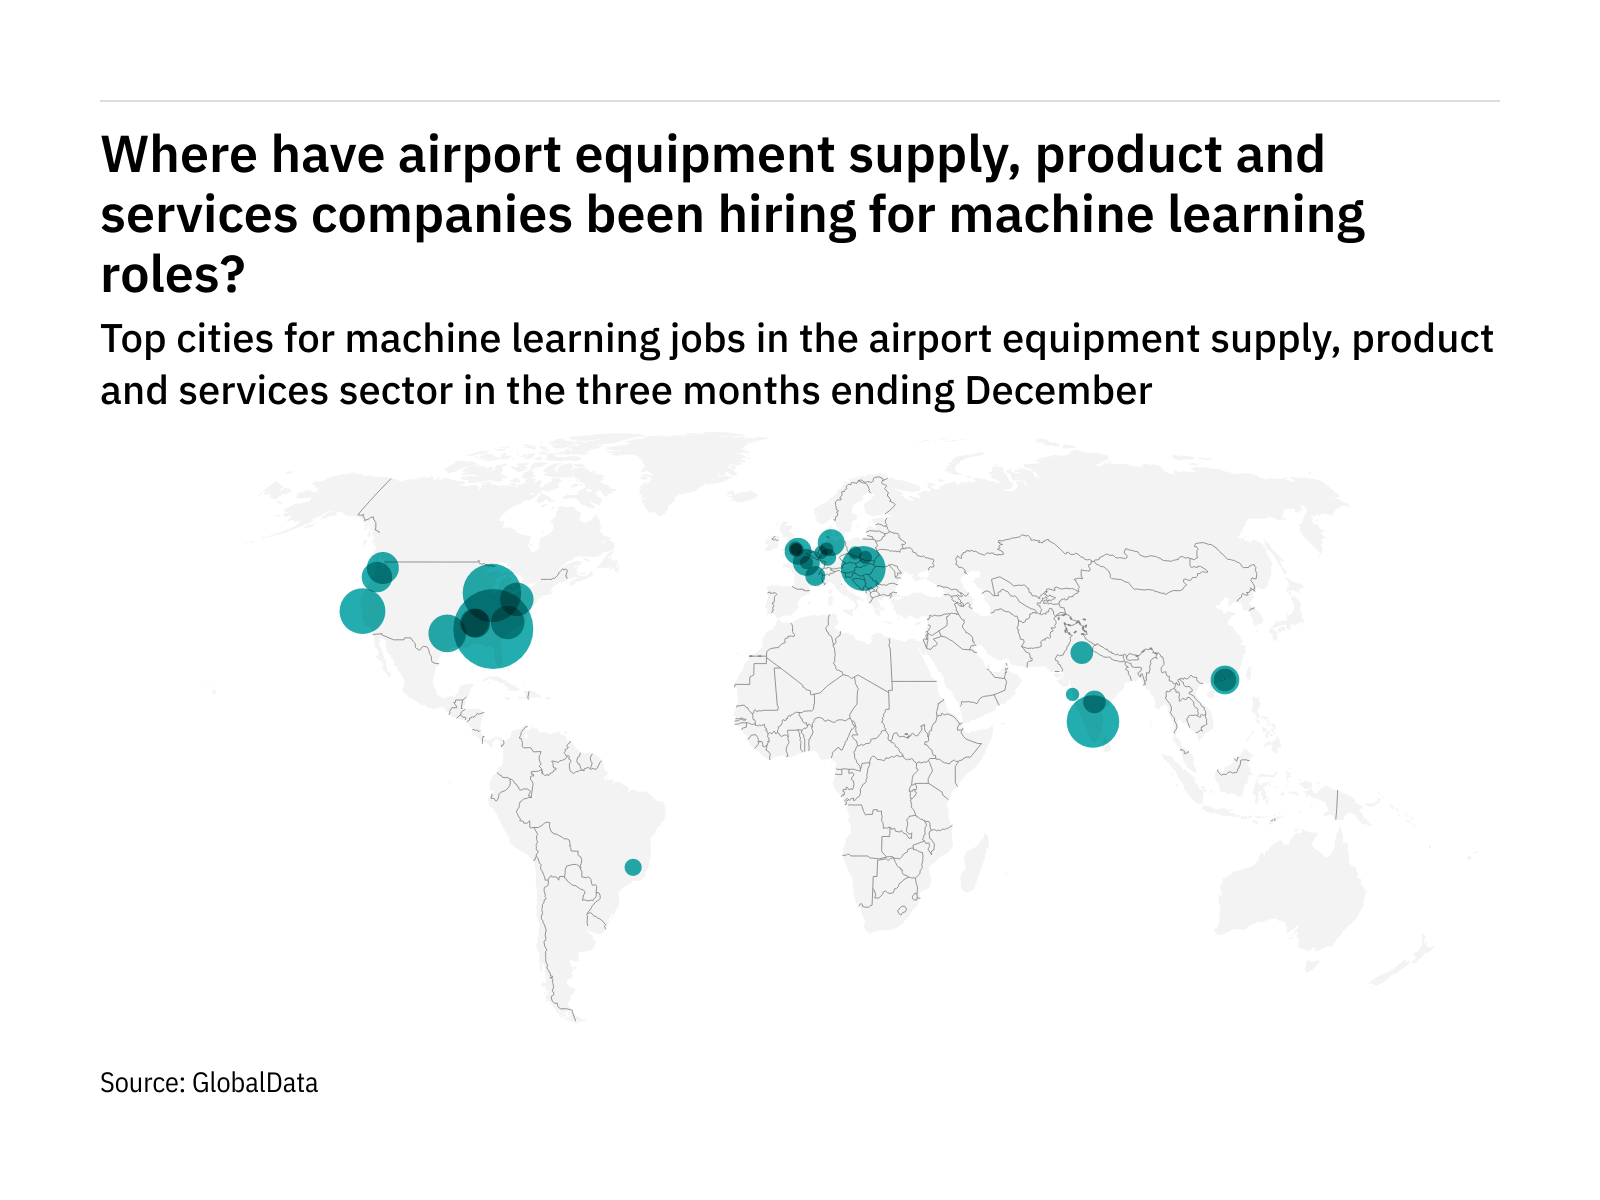 North America is seeing a hiring boom in airport industry machine learning roles